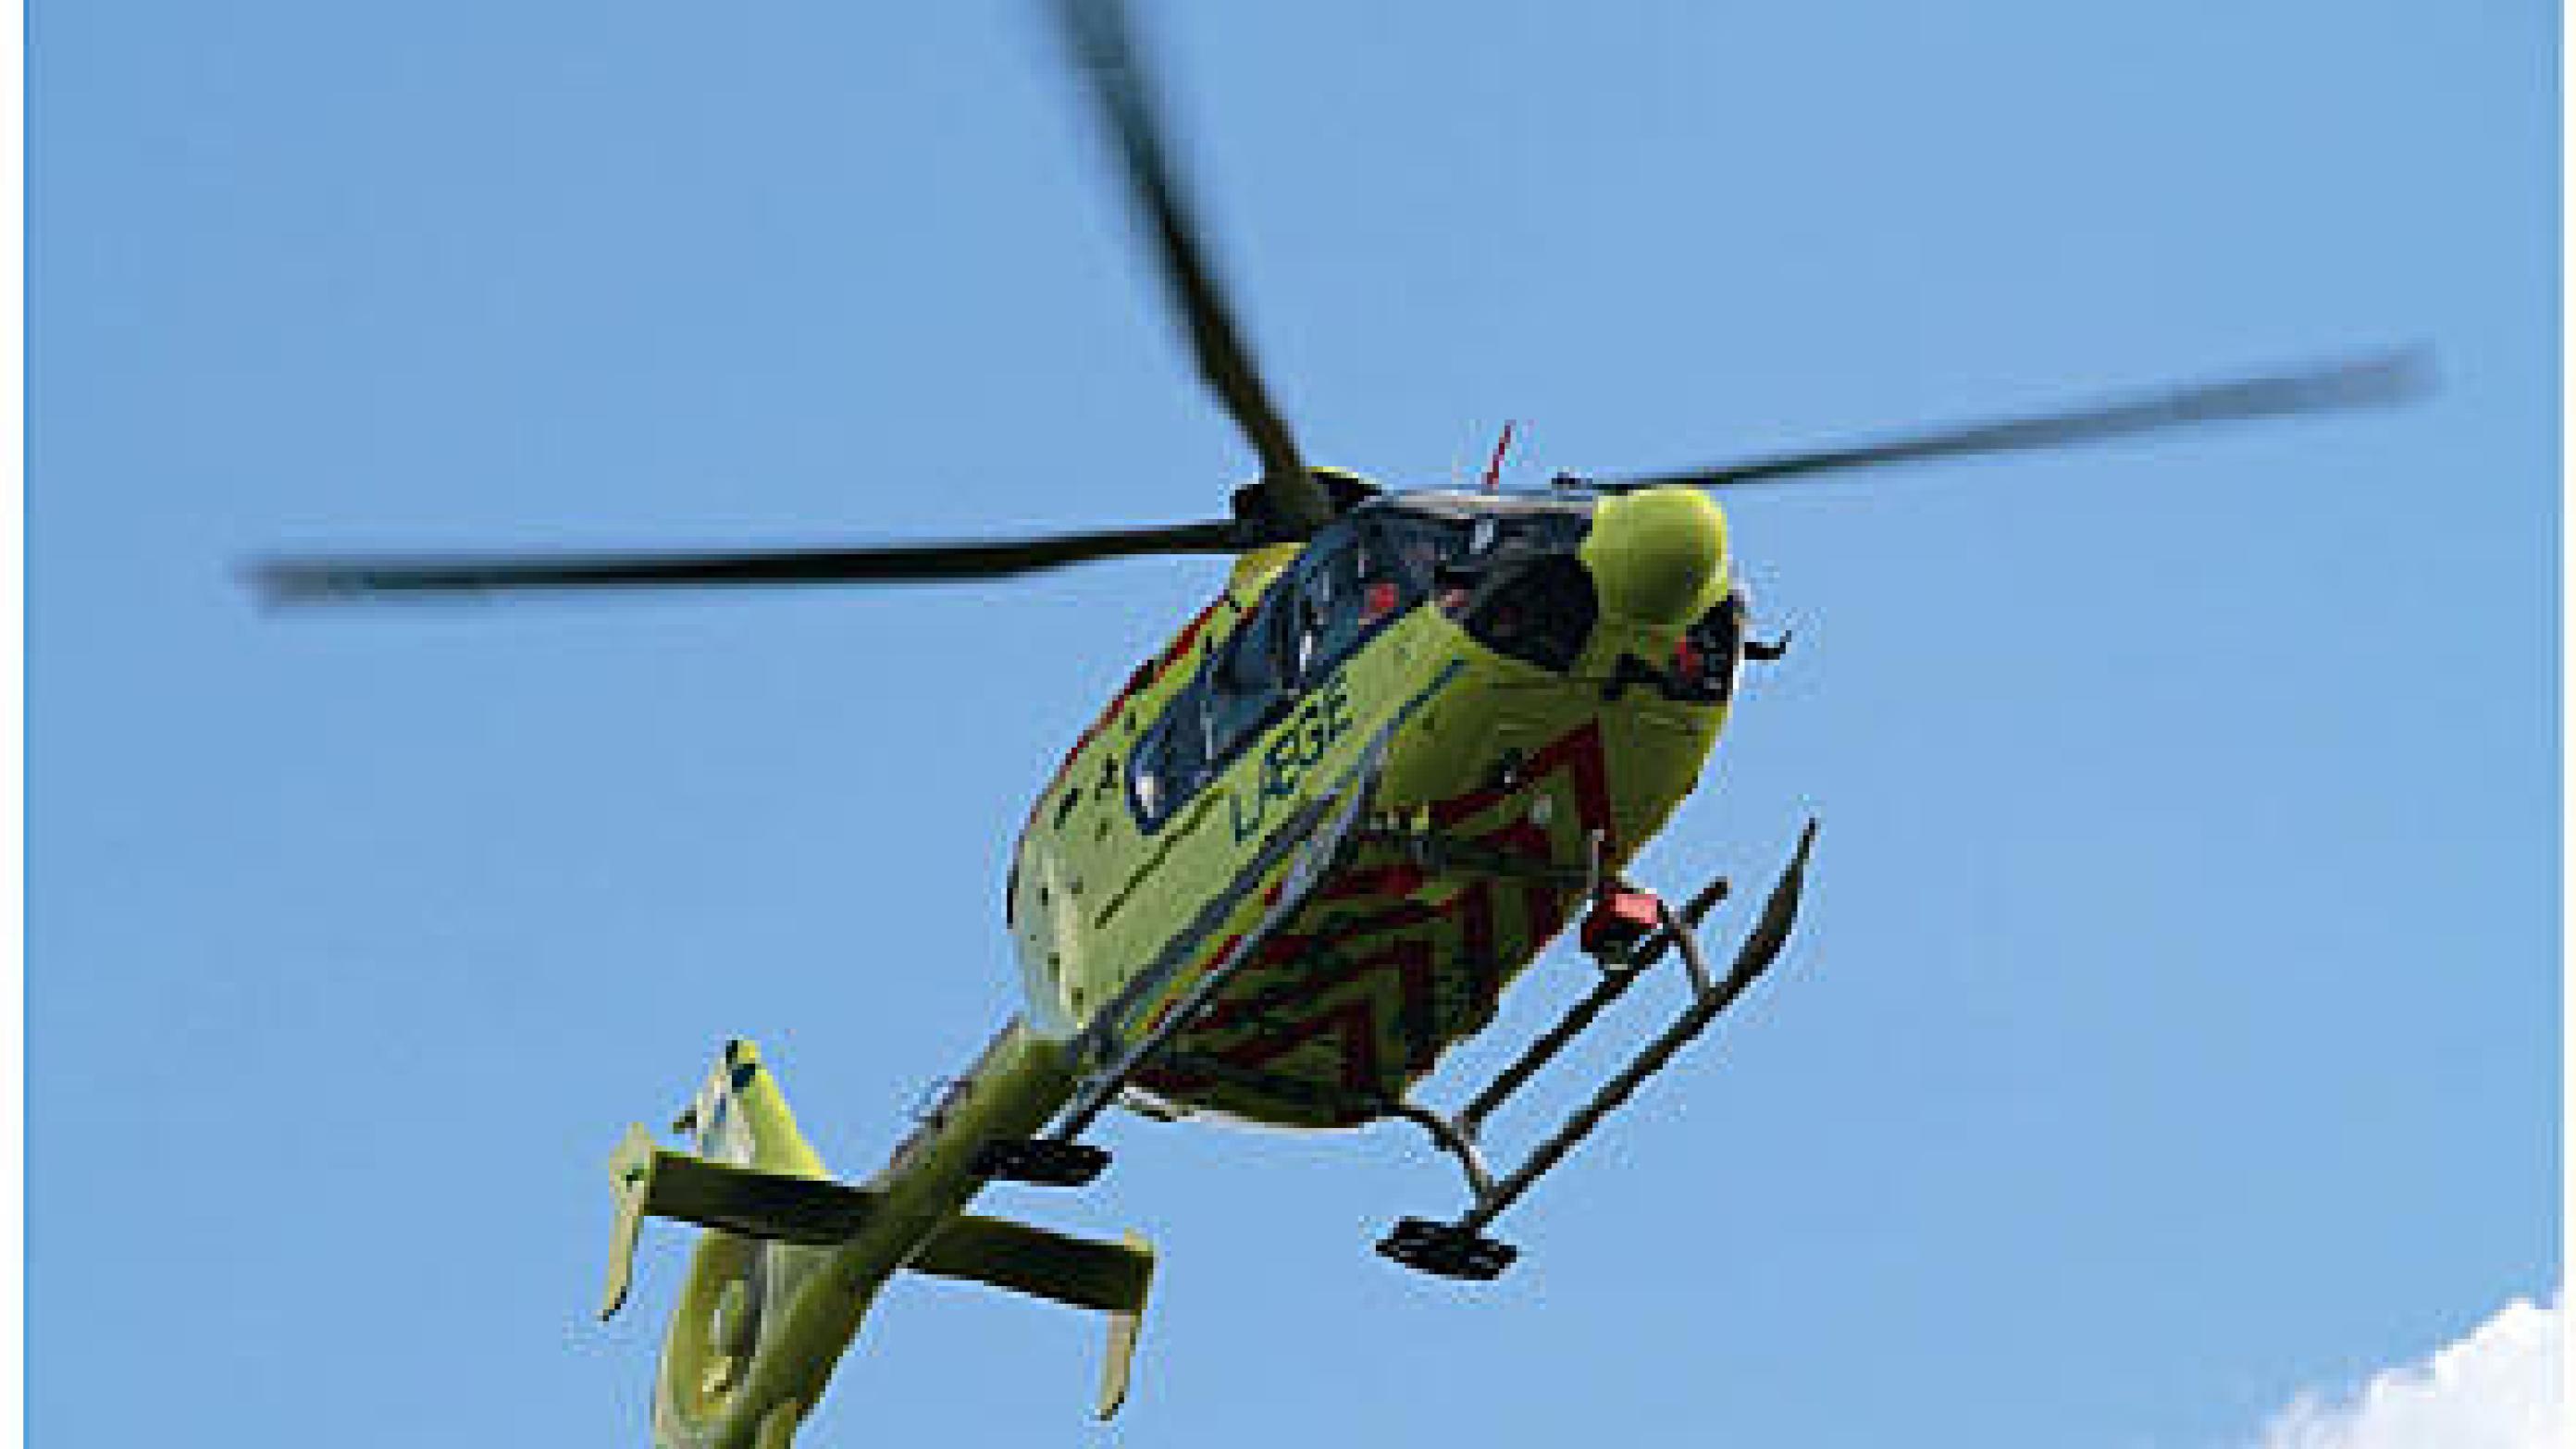 When the Helicopter Emergency Medical System is airborne, time to treatment is significantly reduced.